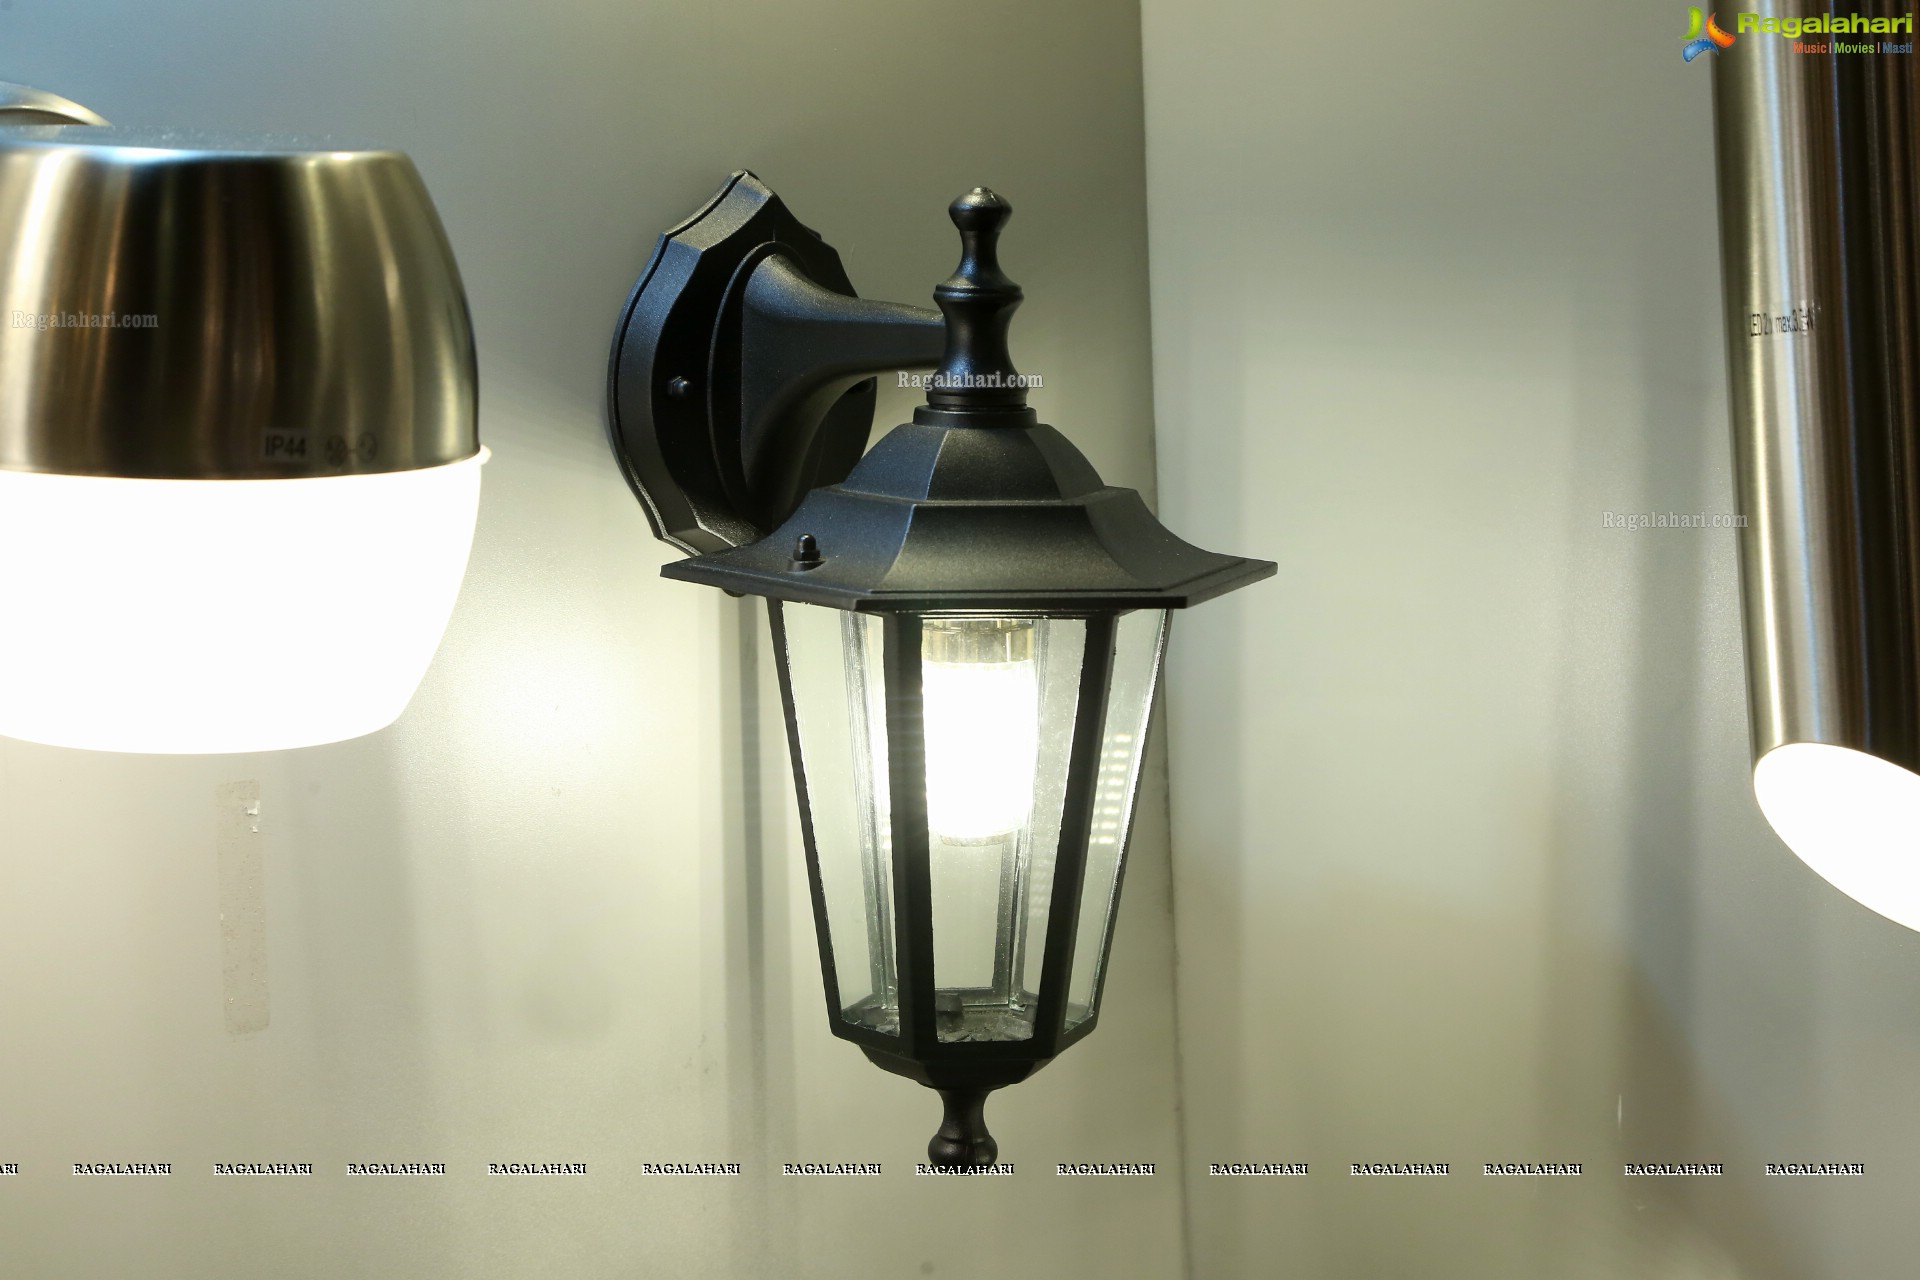 Preview of E'lite Luxury Lighting’s New Lighting Store EGLO [Exclusive]